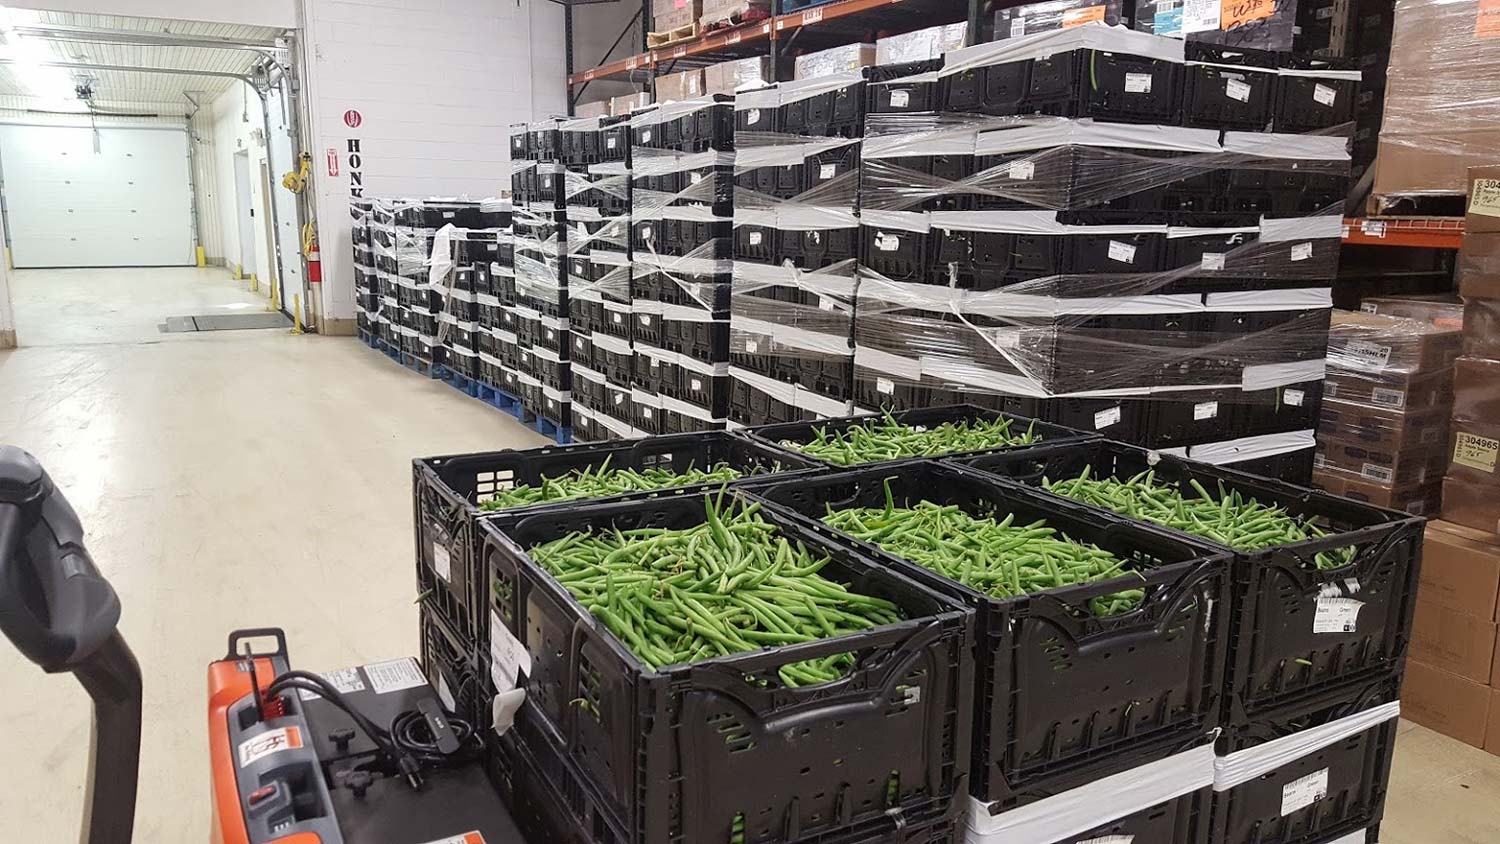 Drivers can donate shipments of all sizes, such as this large donation that included vibrant green beans. Provided by Alex Sindorf, Indy Hunger Network.